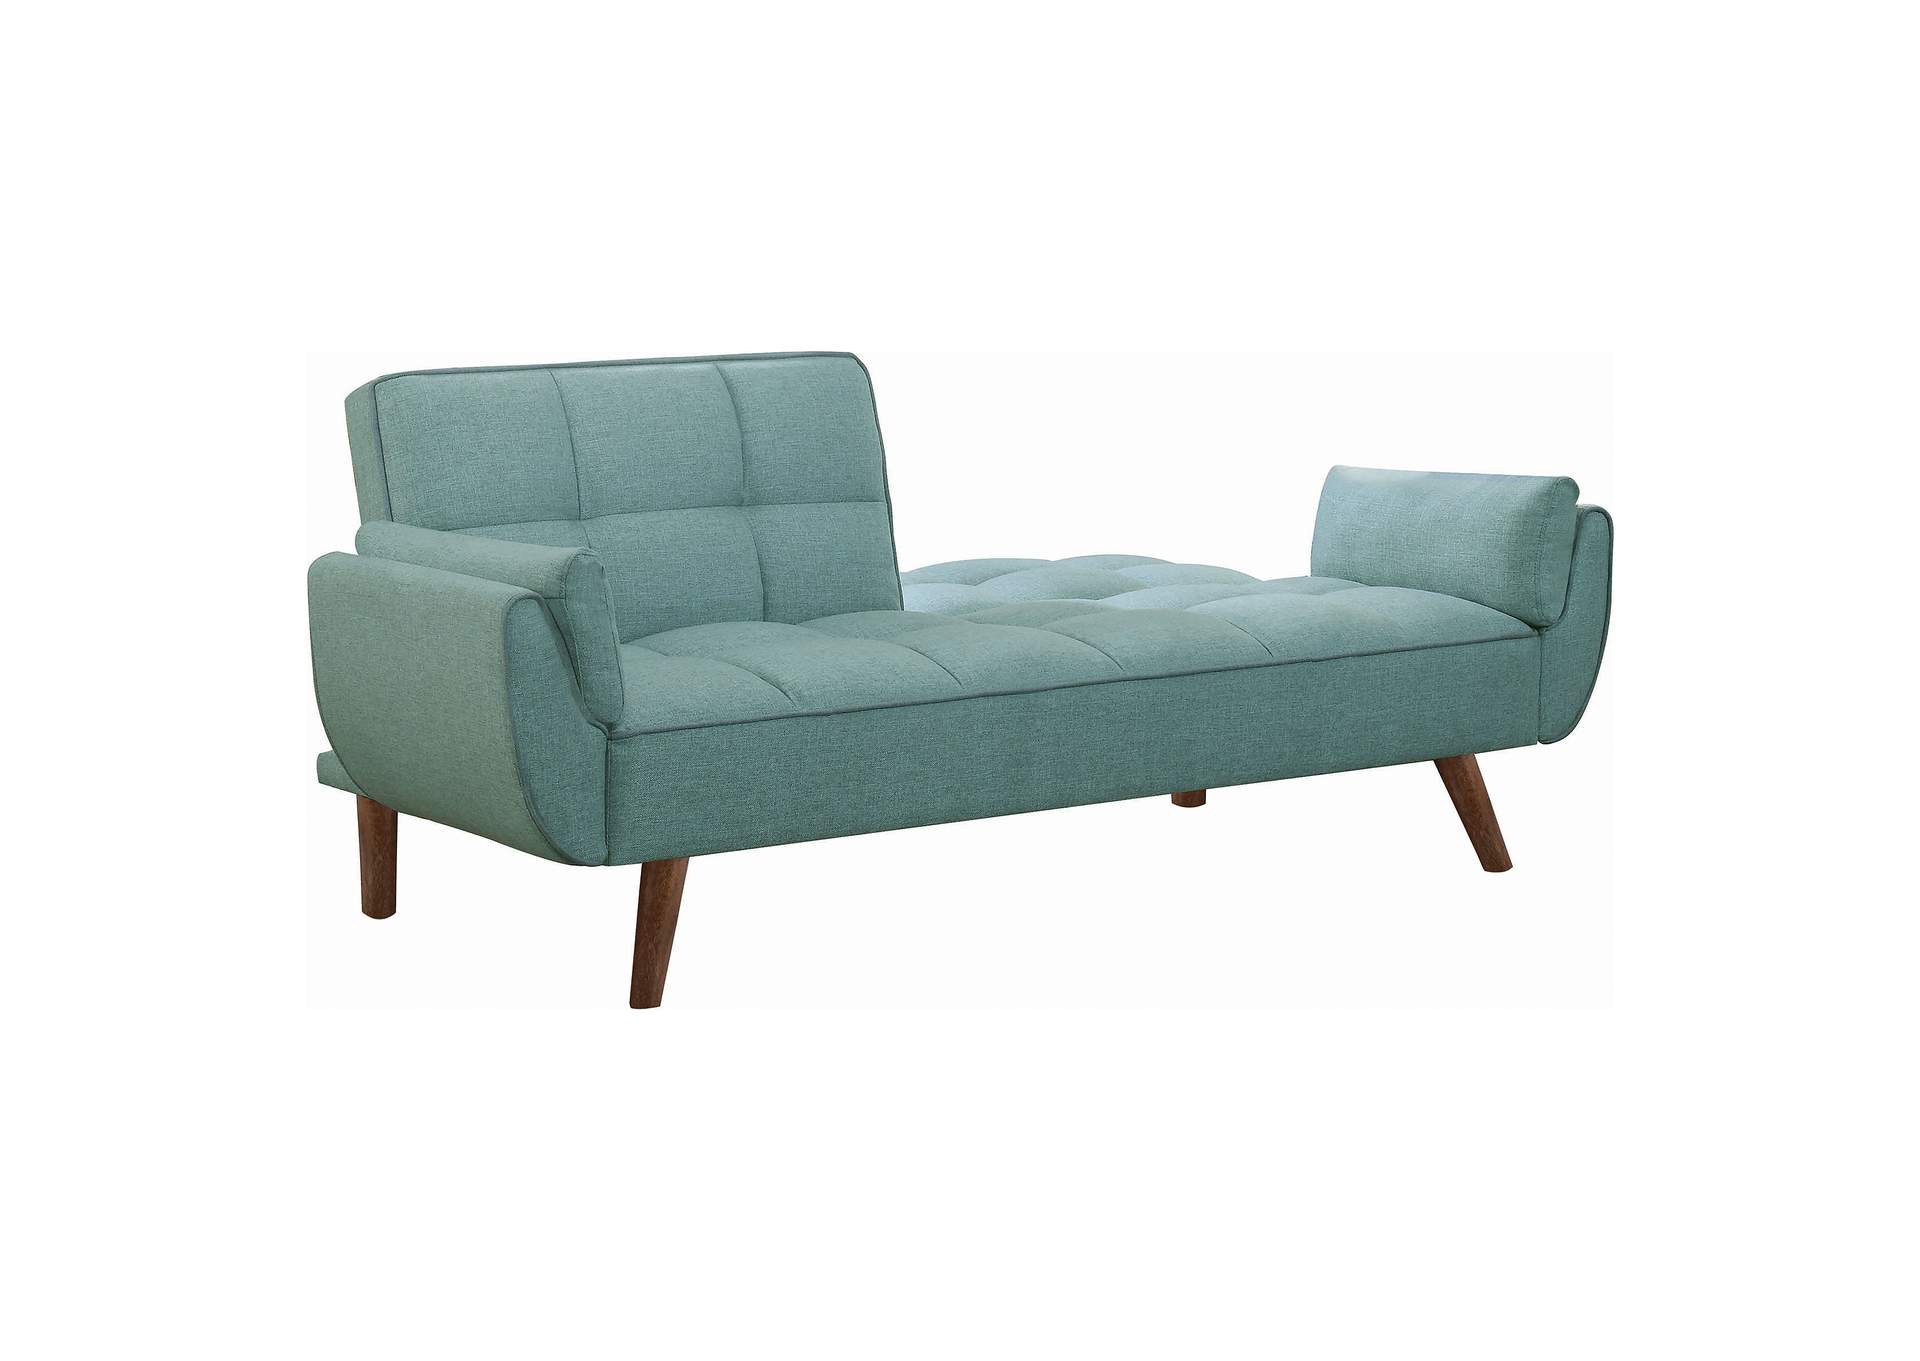 Caufield Biscuit-tufted Sofa Bed Turquoise Blue,Coaster Furniture